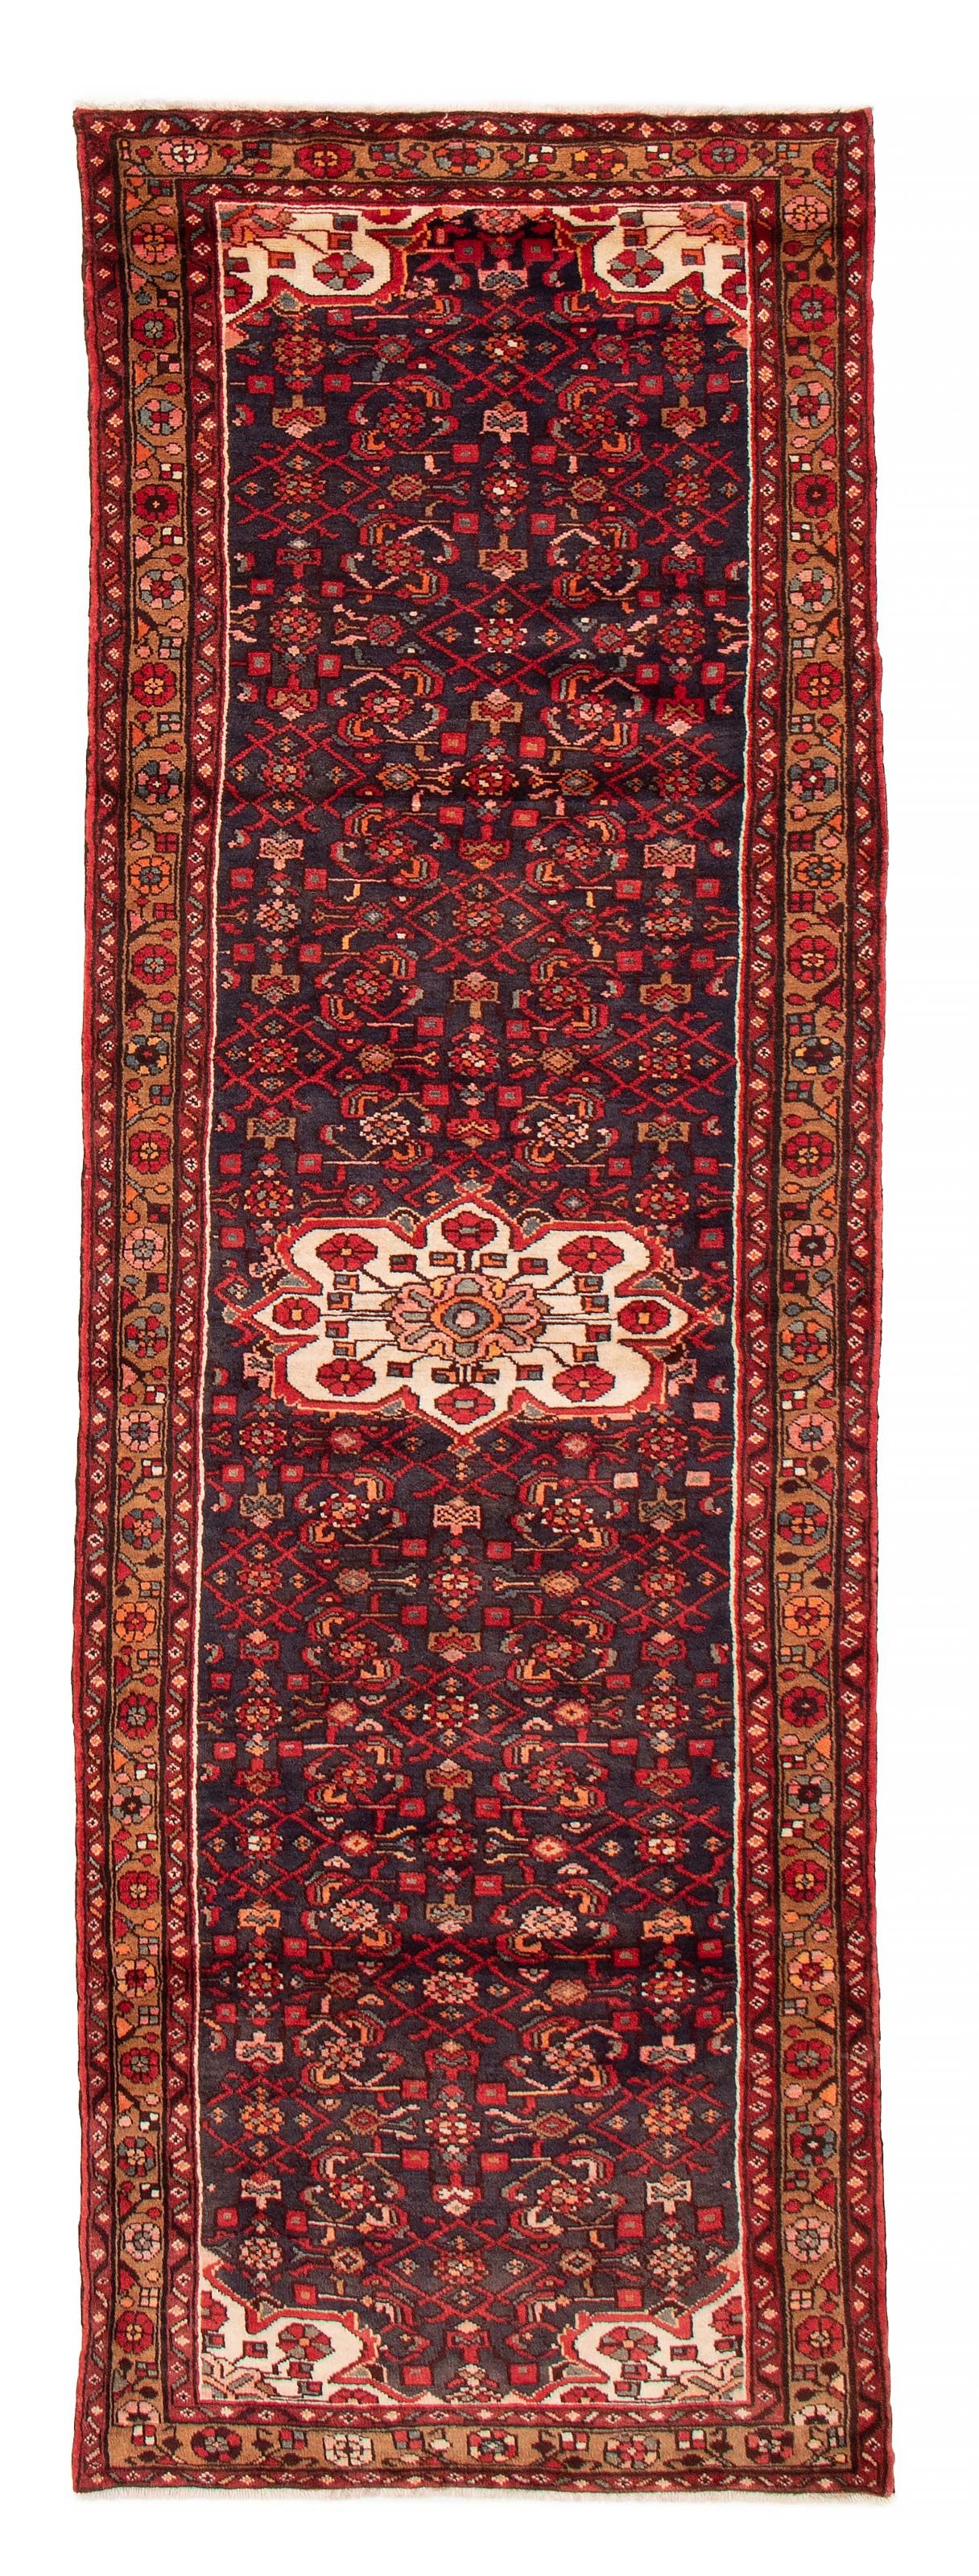 Rug Source Antique Moroccan Hand Knotted Oriental Traditional Rug Red - 11'4 x 3'1 Runner